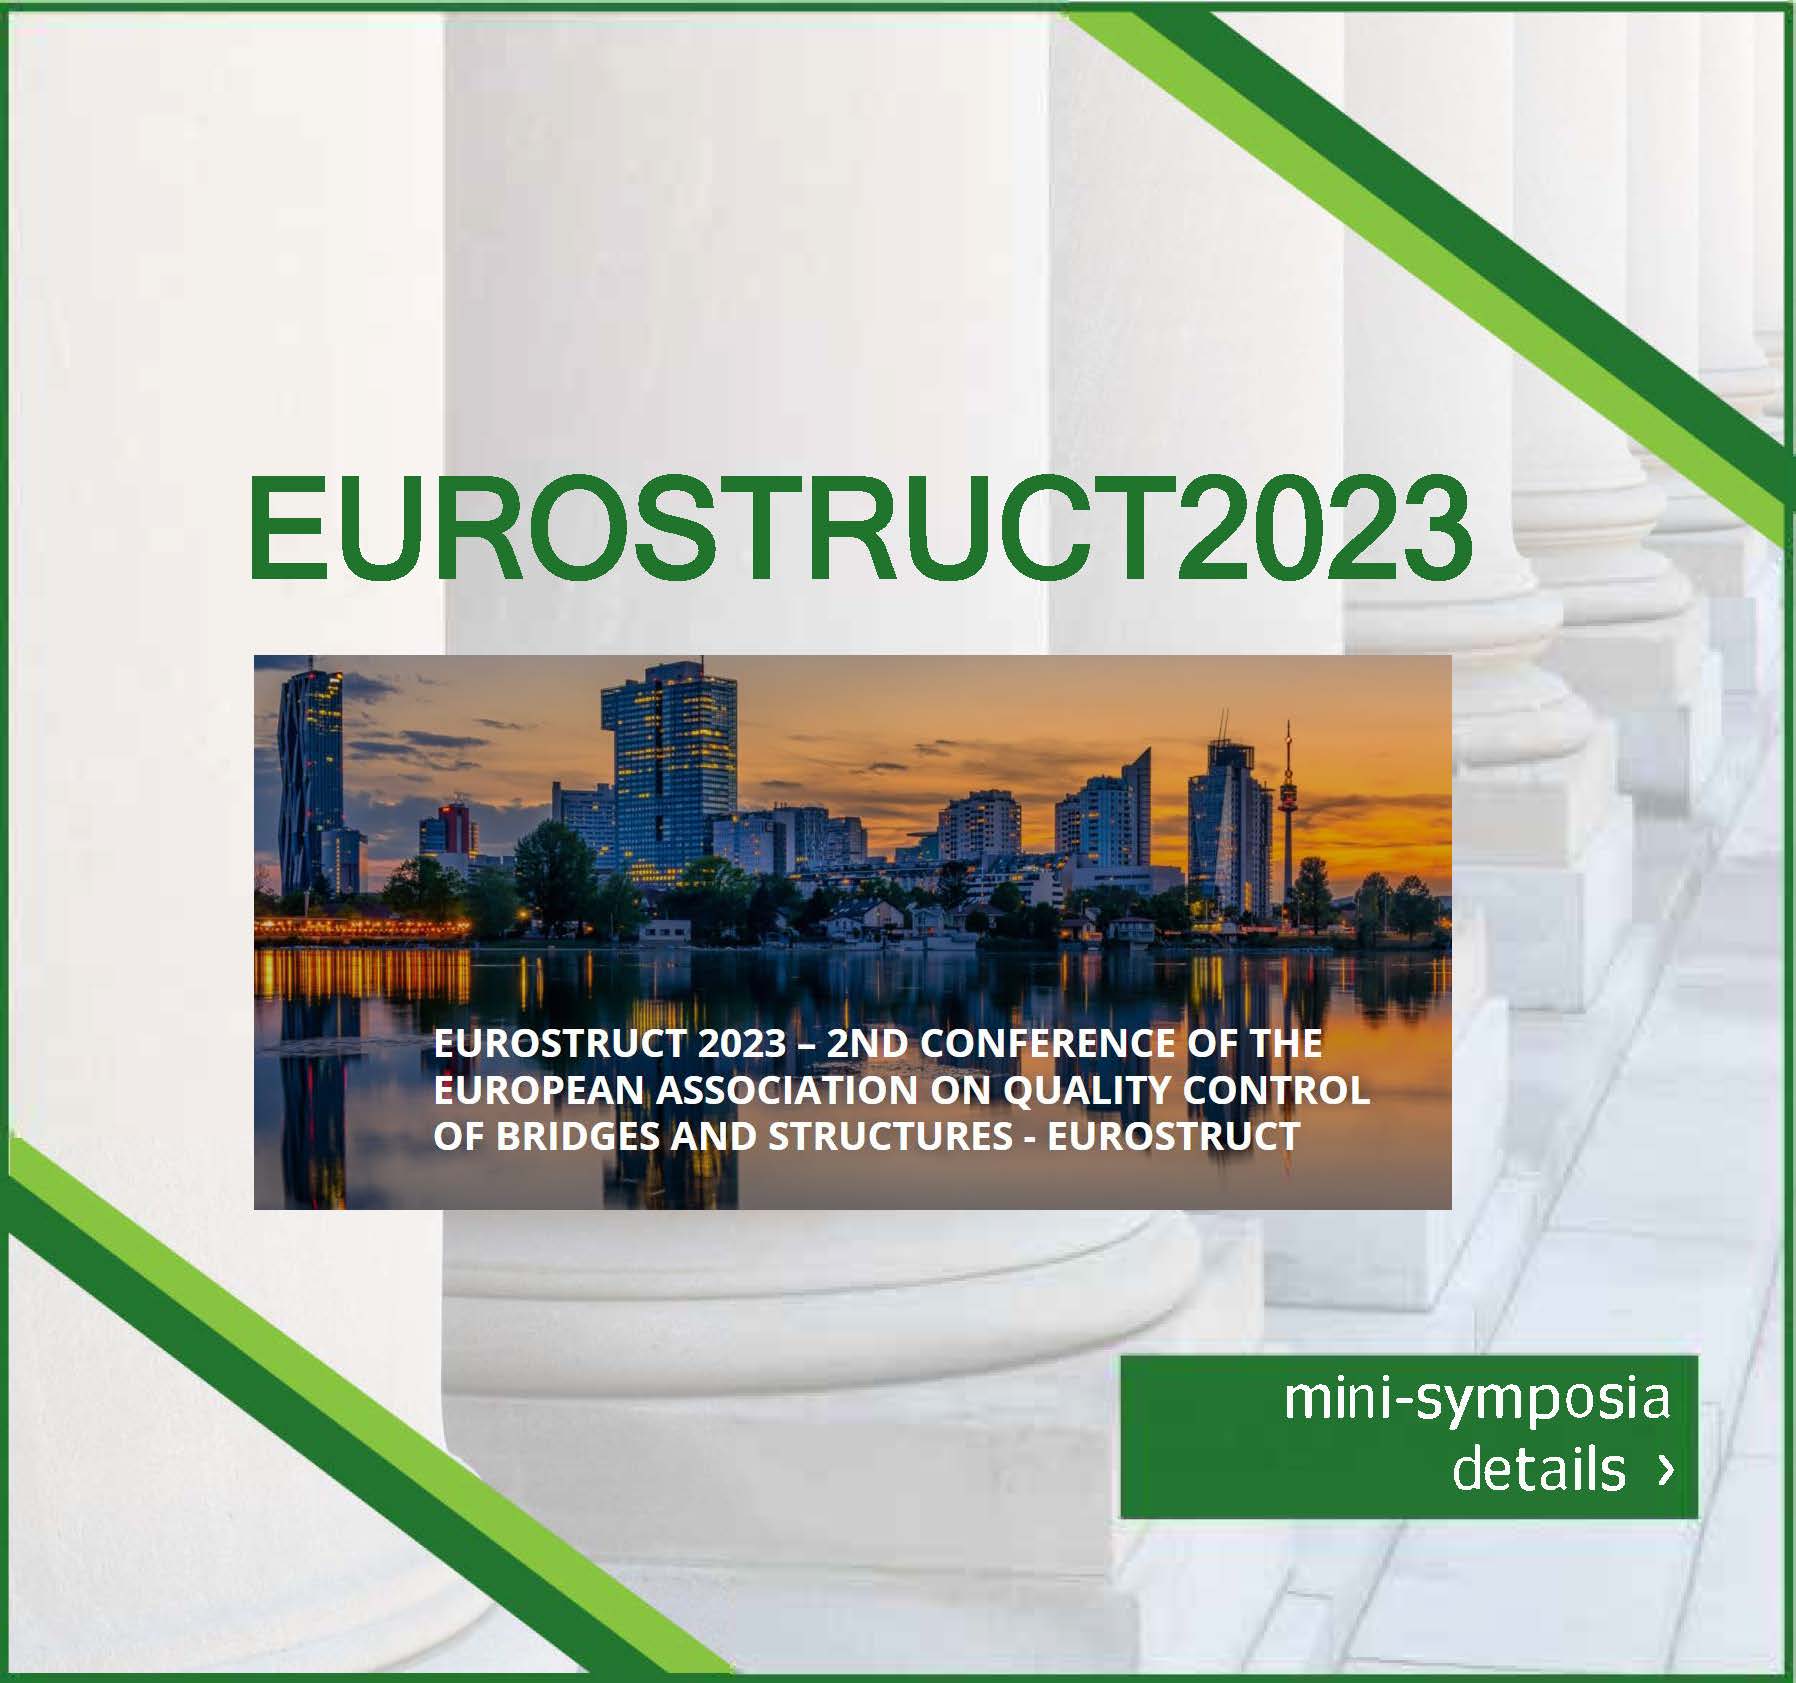 EUROSTRUCT2023 – 2nd Conference of the European Association on Quality Control of Bridges and Structures